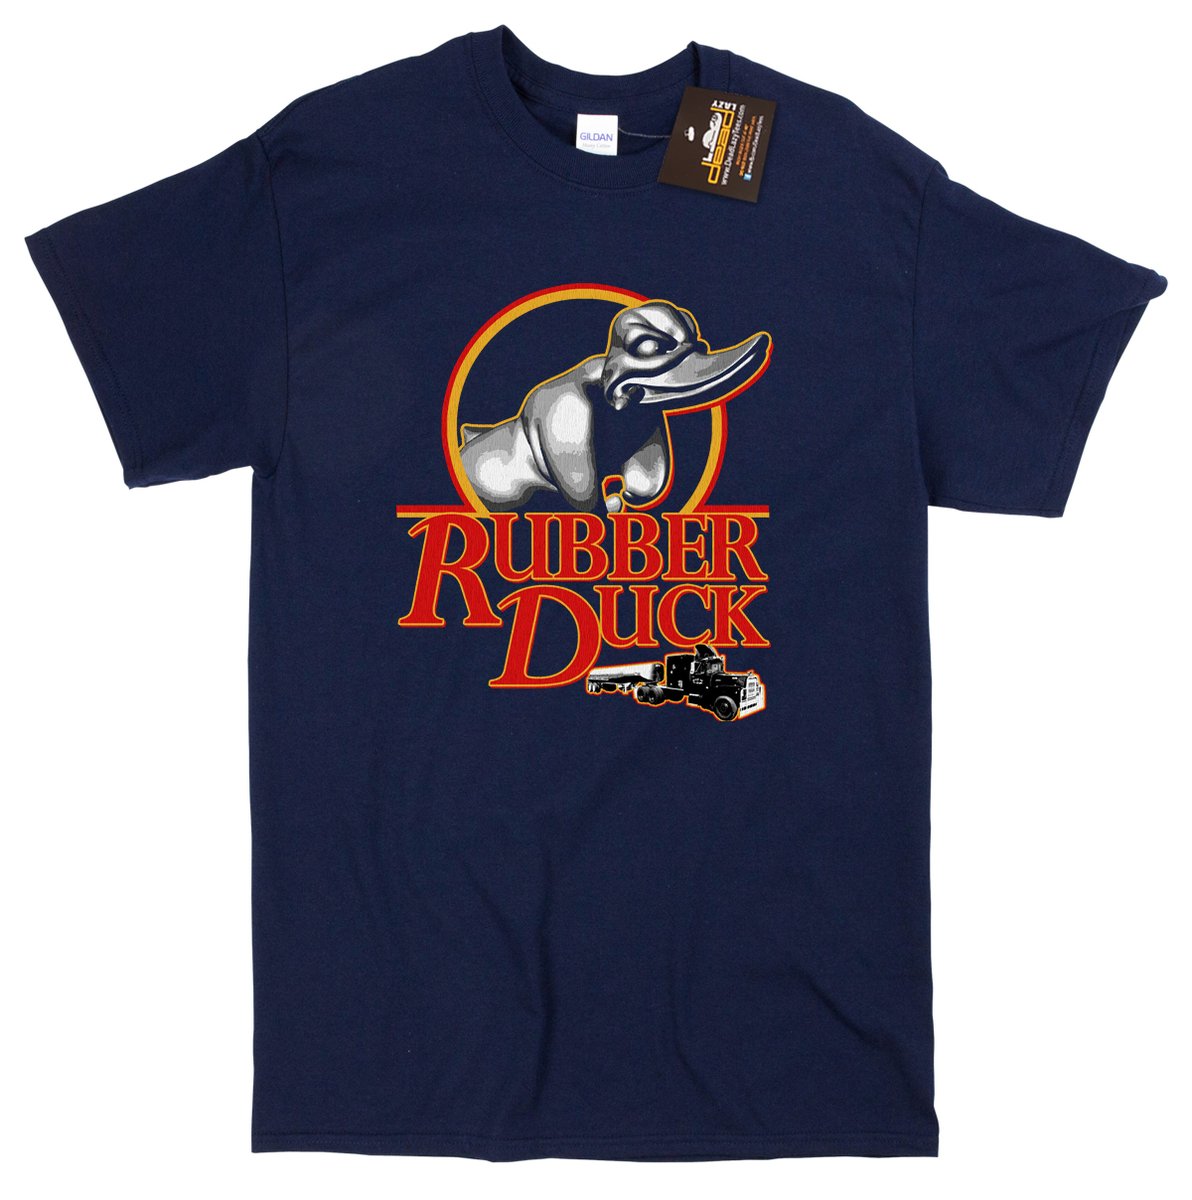 Rubber Duck T-shirt inspired by Convoy